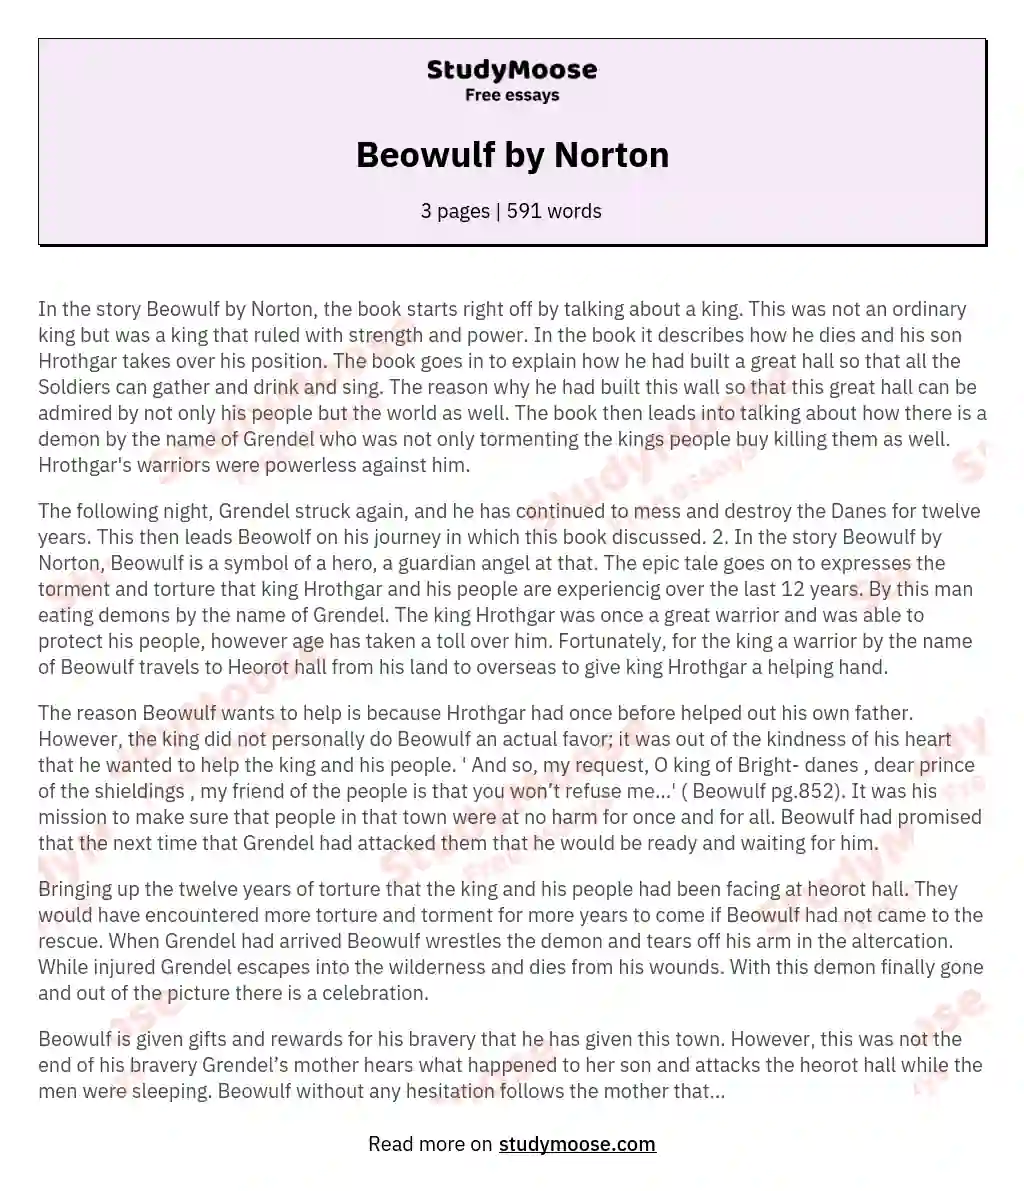 Beowulf by Norton essay